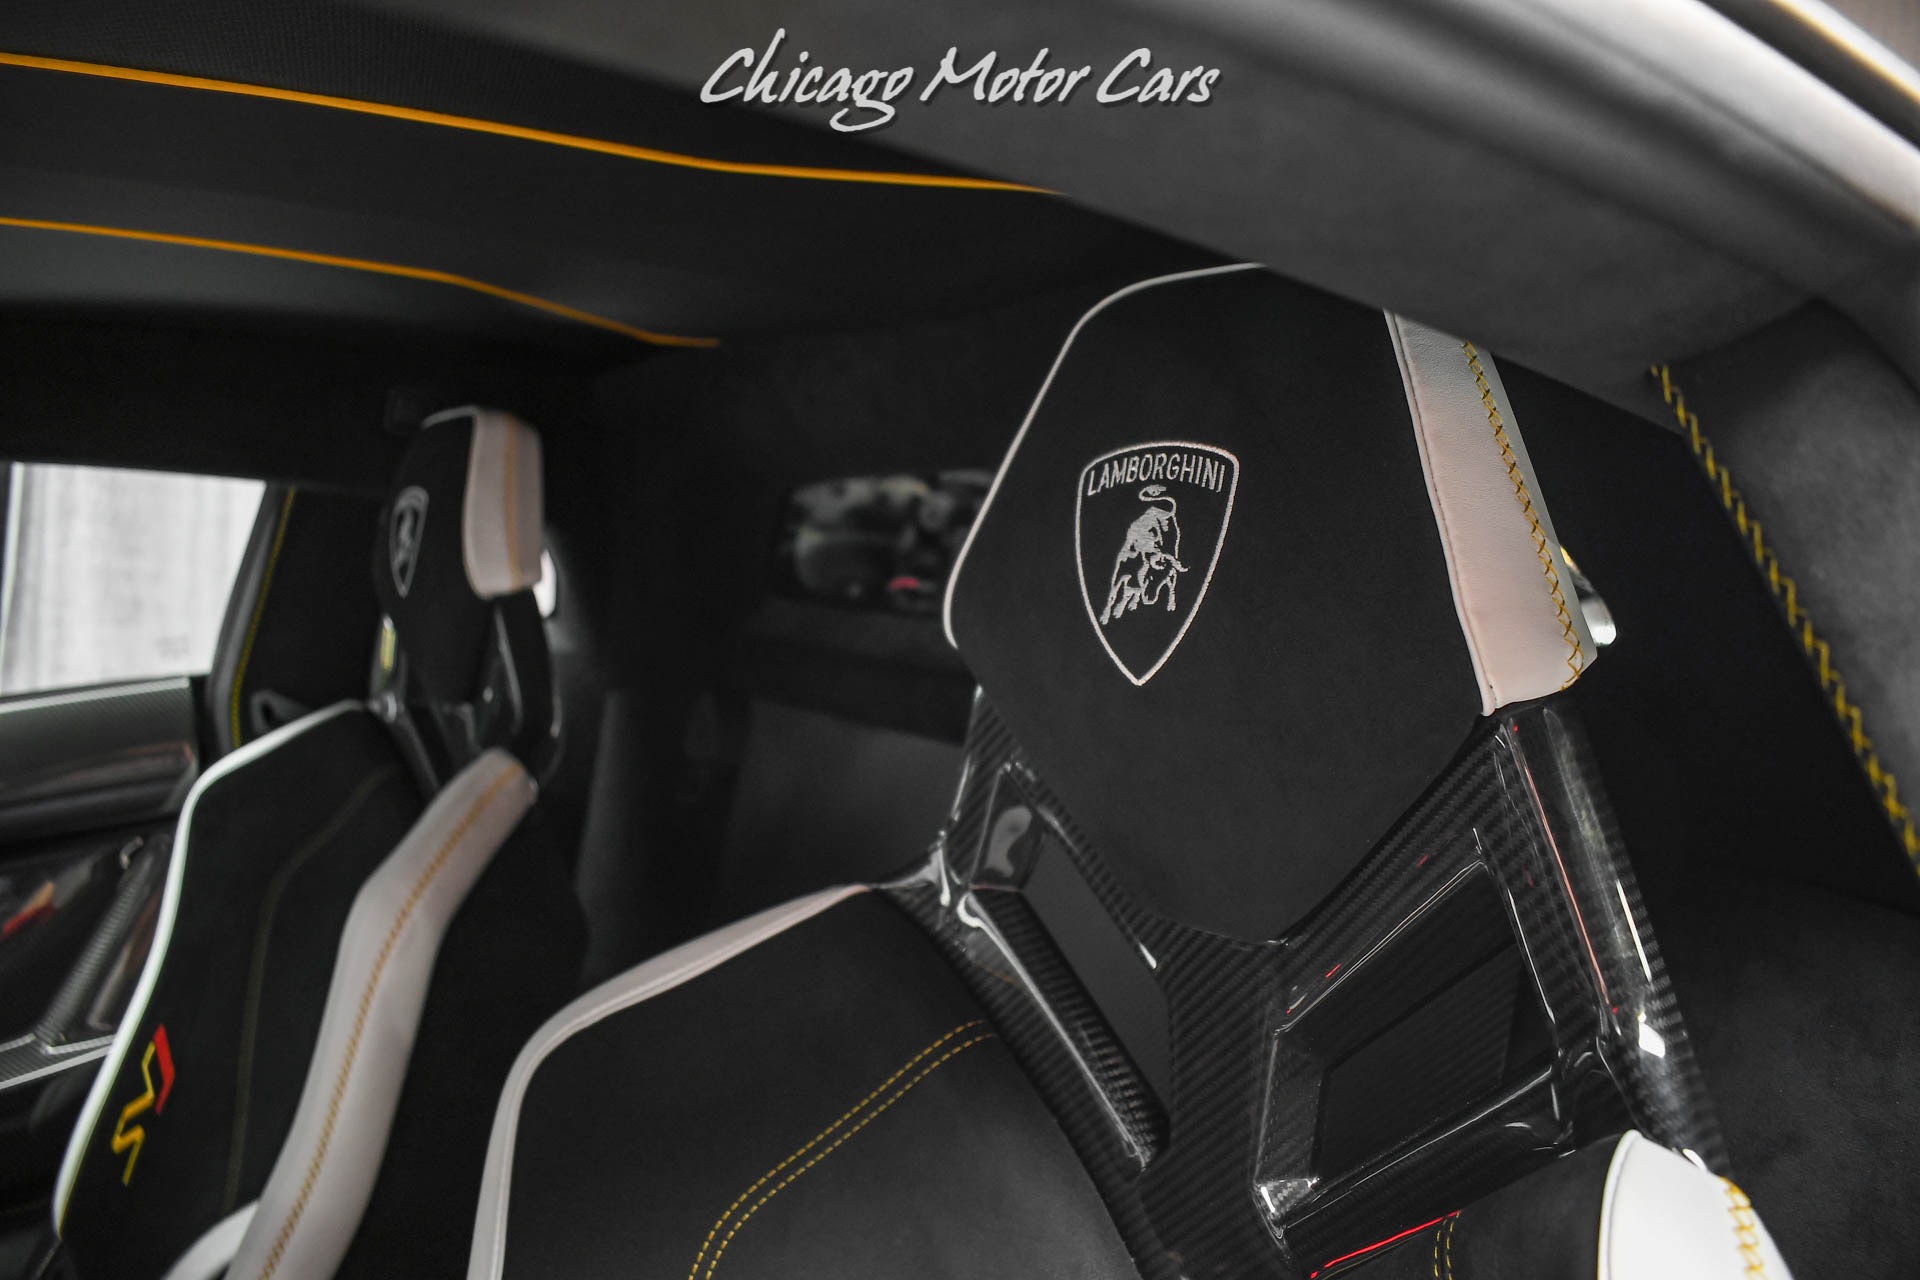 Used-2020-Lamborghini-Aventador-LP770-4-SVJ-63-Coupe-163-Produced-Extremely-Rare-HOT-Spec-TONS-of-Carbon